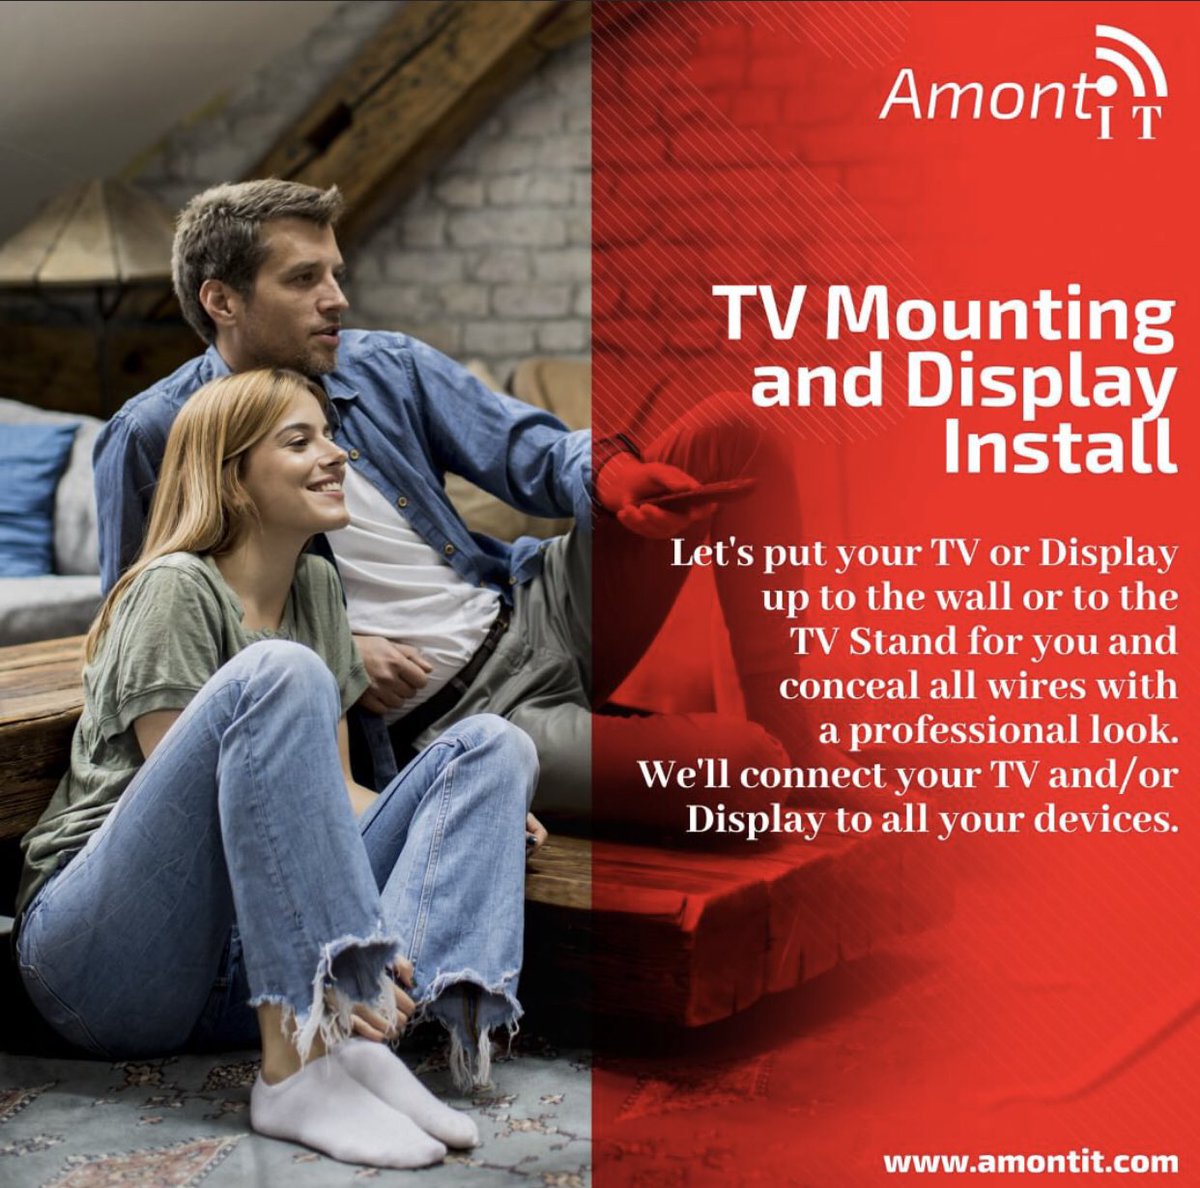 We will take care of your TV Mounting need and install your Display anywhere you want in your room or office. 😎 We are the Telecoms and VOIP Installation service team you need. Click the link to get started amontit.com/Telecoms-And-V…
#tvinstallation #tvinstallationinchicago